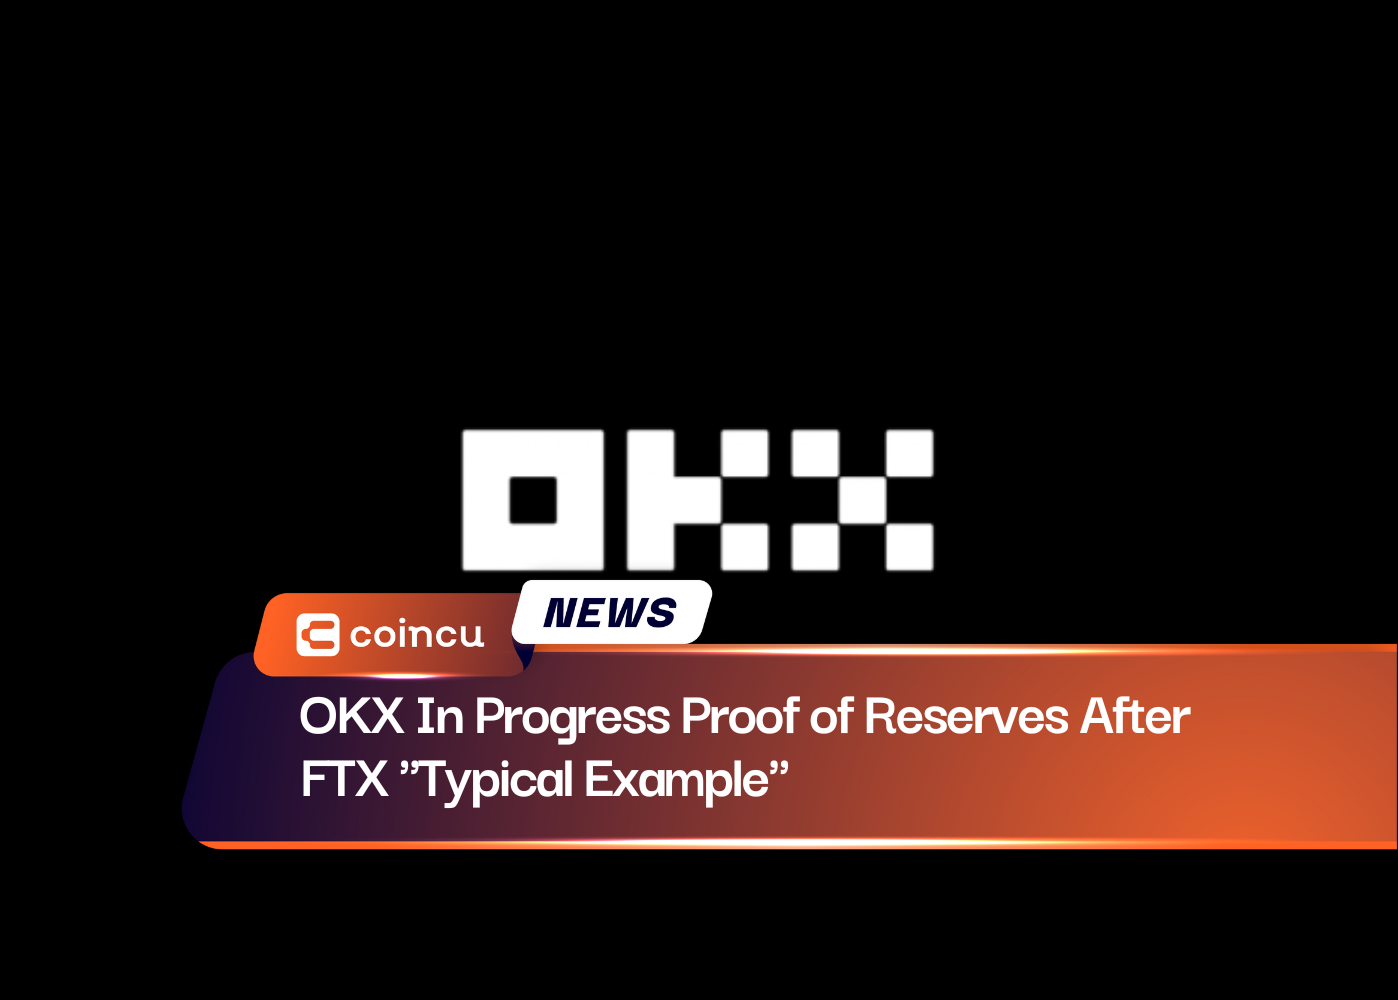 OKX In Progress Proof of Reserves After FTX "Typical Example"